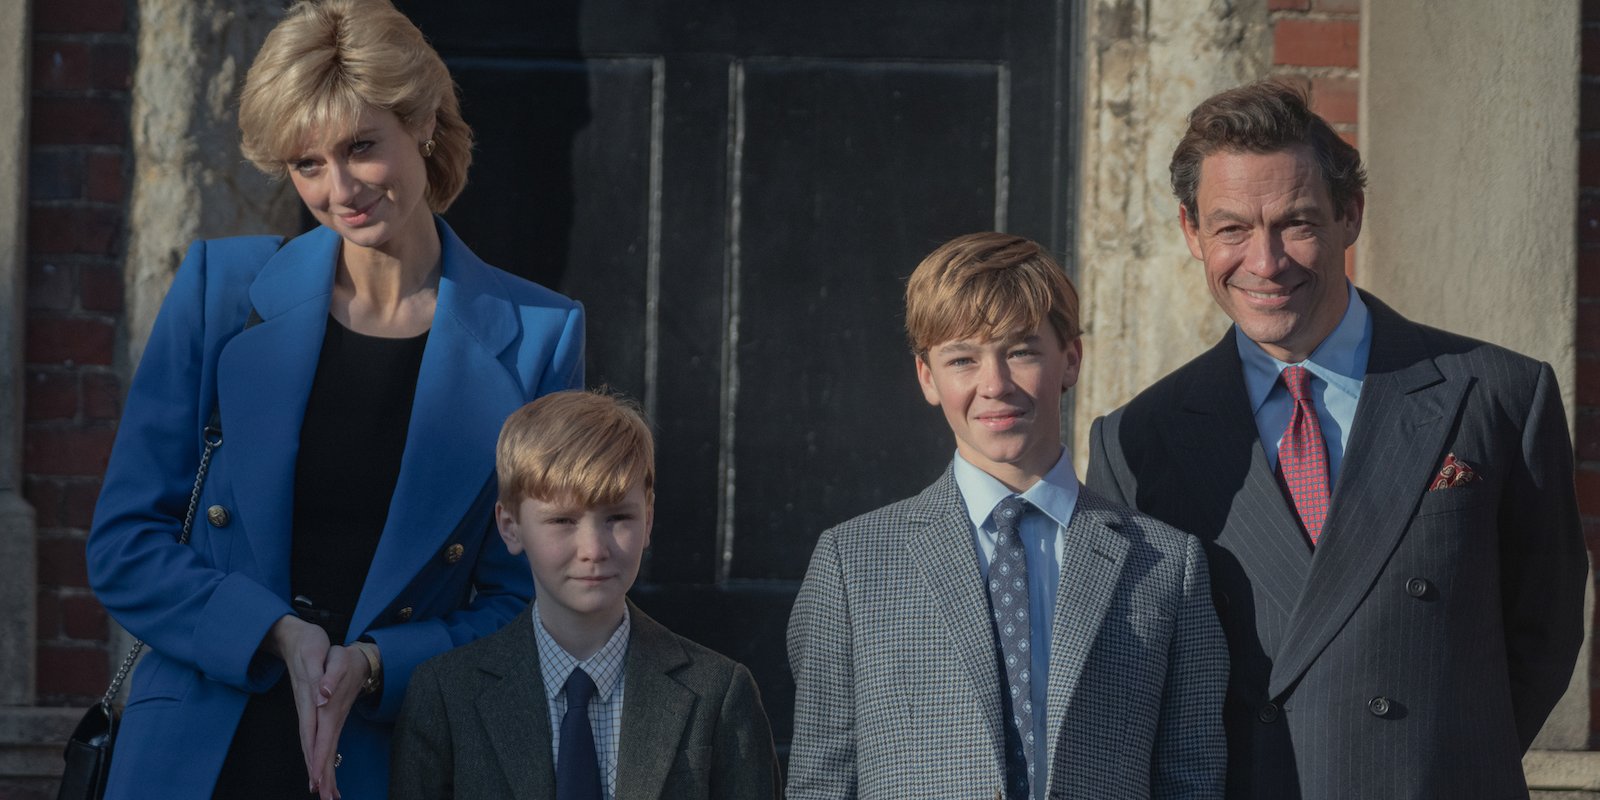 'The Crown': Season 5: Princess Diana (Elizabeth Debicki) and Prince Charles (Dominic West) stand behind Prince Harry (Will Powell) and William (Senan West)